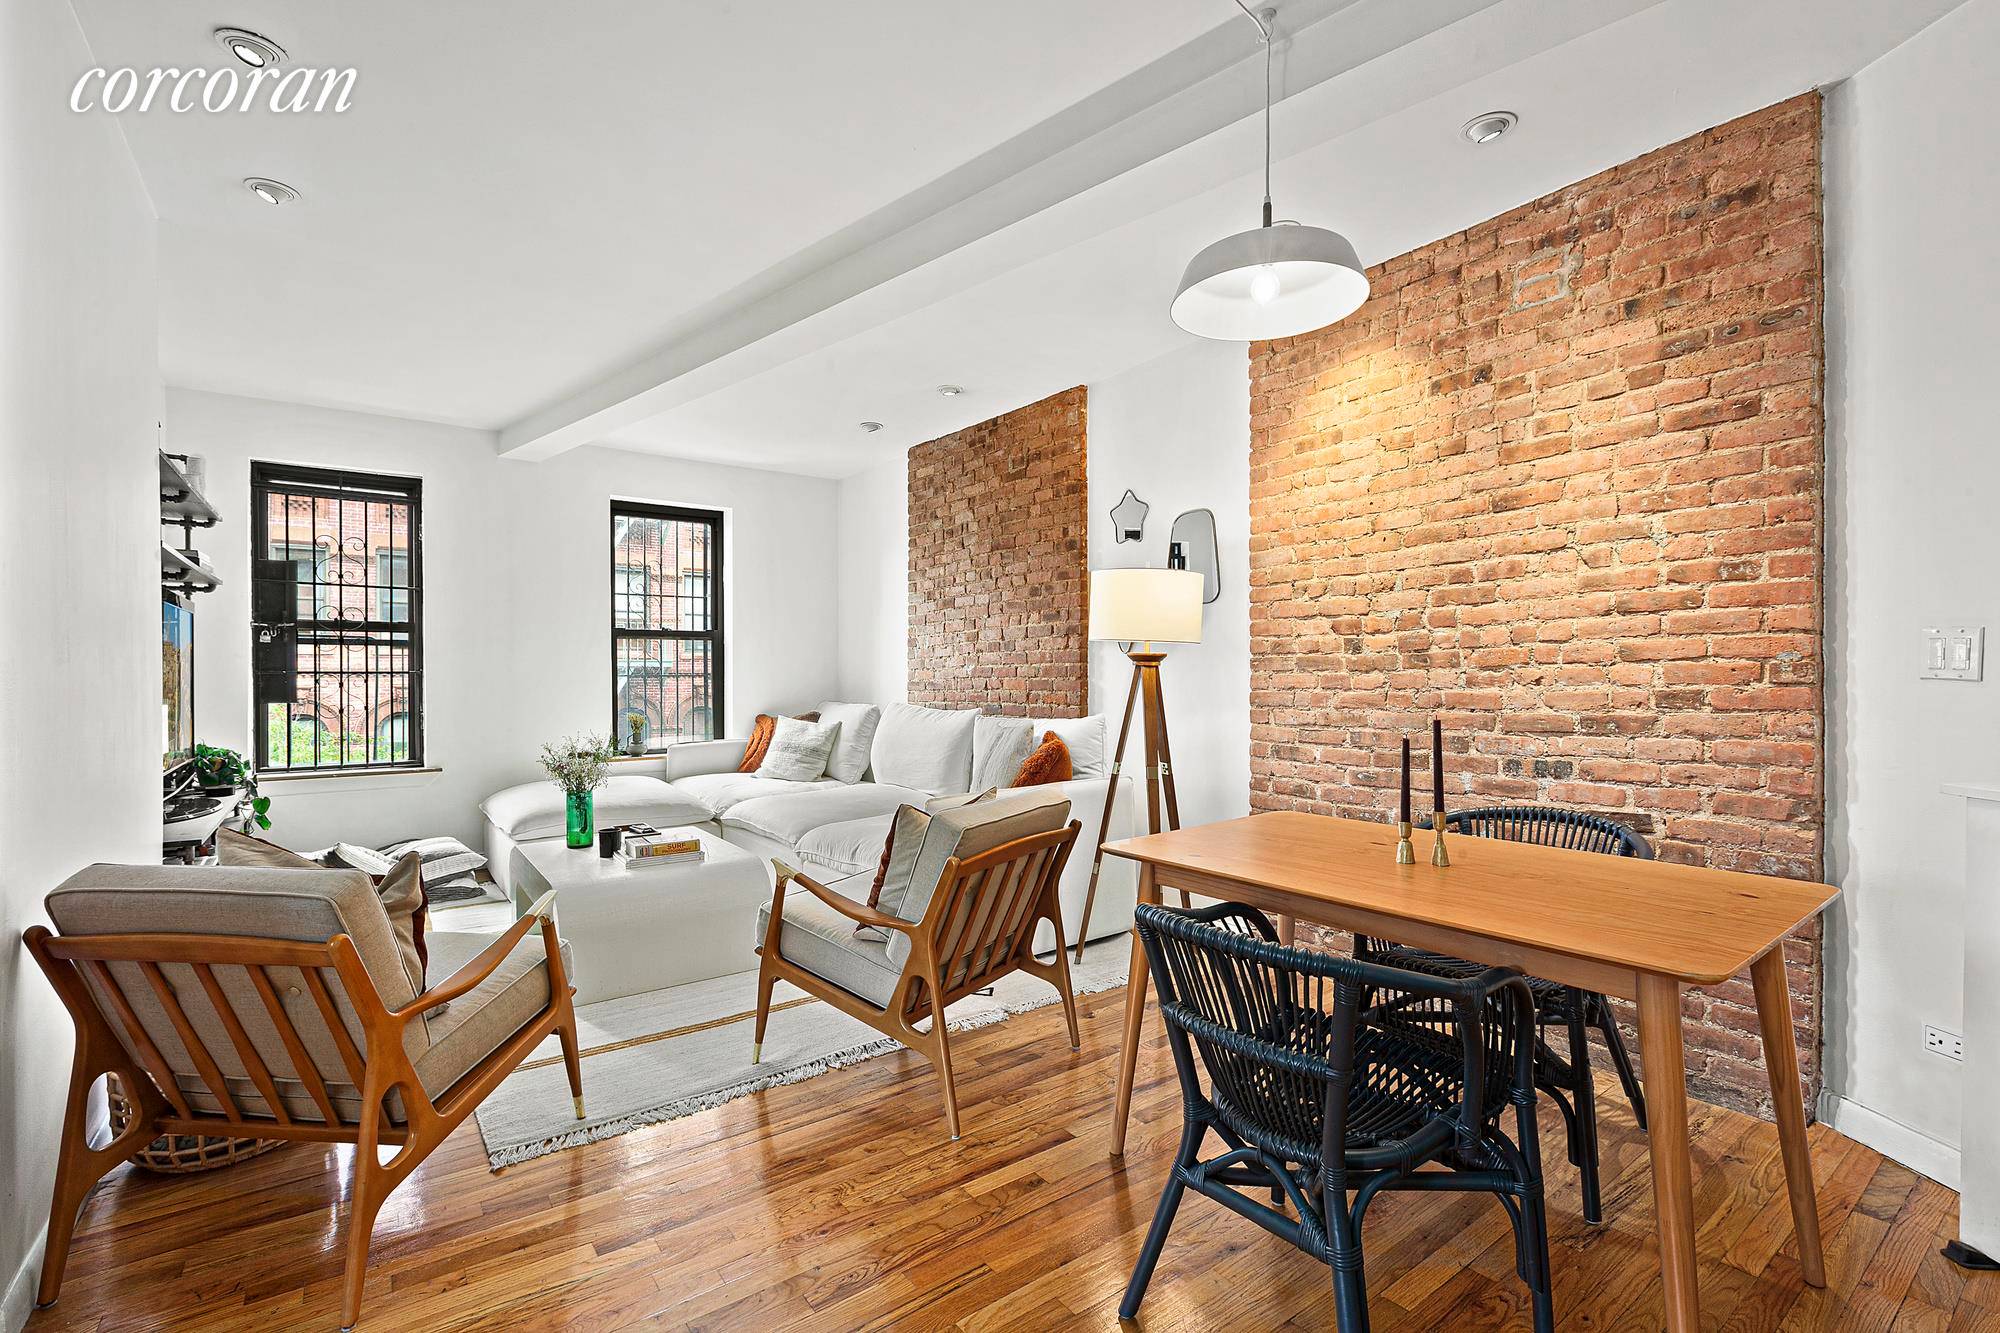 Beautifully renovated and move in ready condition this stylish Lower East Side two bedroom has an abundance of natural light.